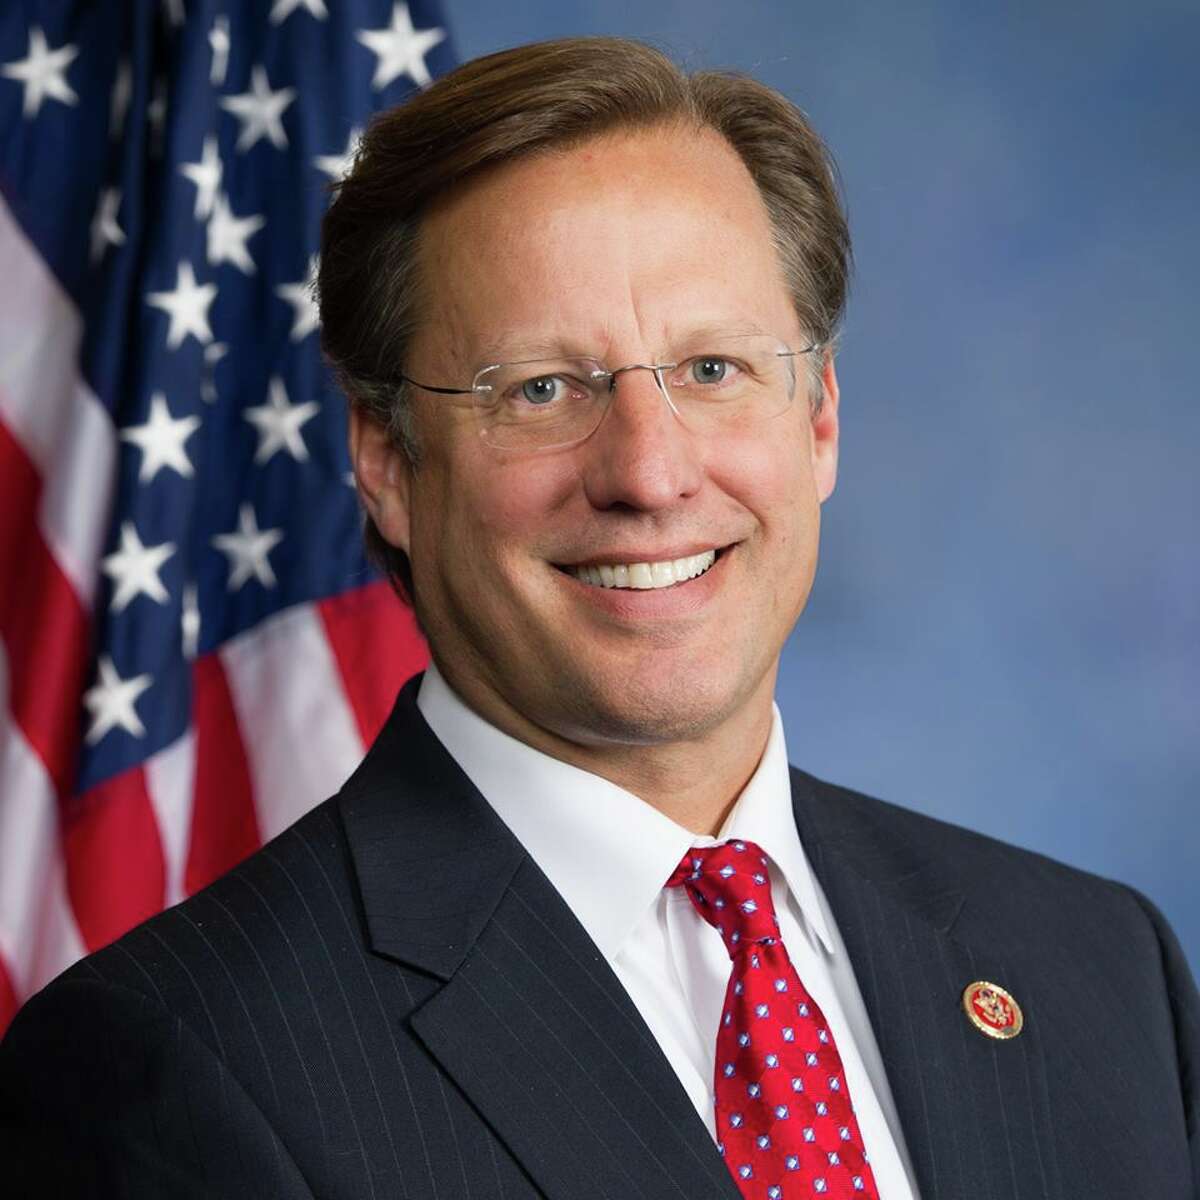 U.S. Rep. David Brat (R-Virginia) told conservative talk radio host Rusty Humphries "In our country it looks like we have an ISIS center in Texas now, that's been reported last week."